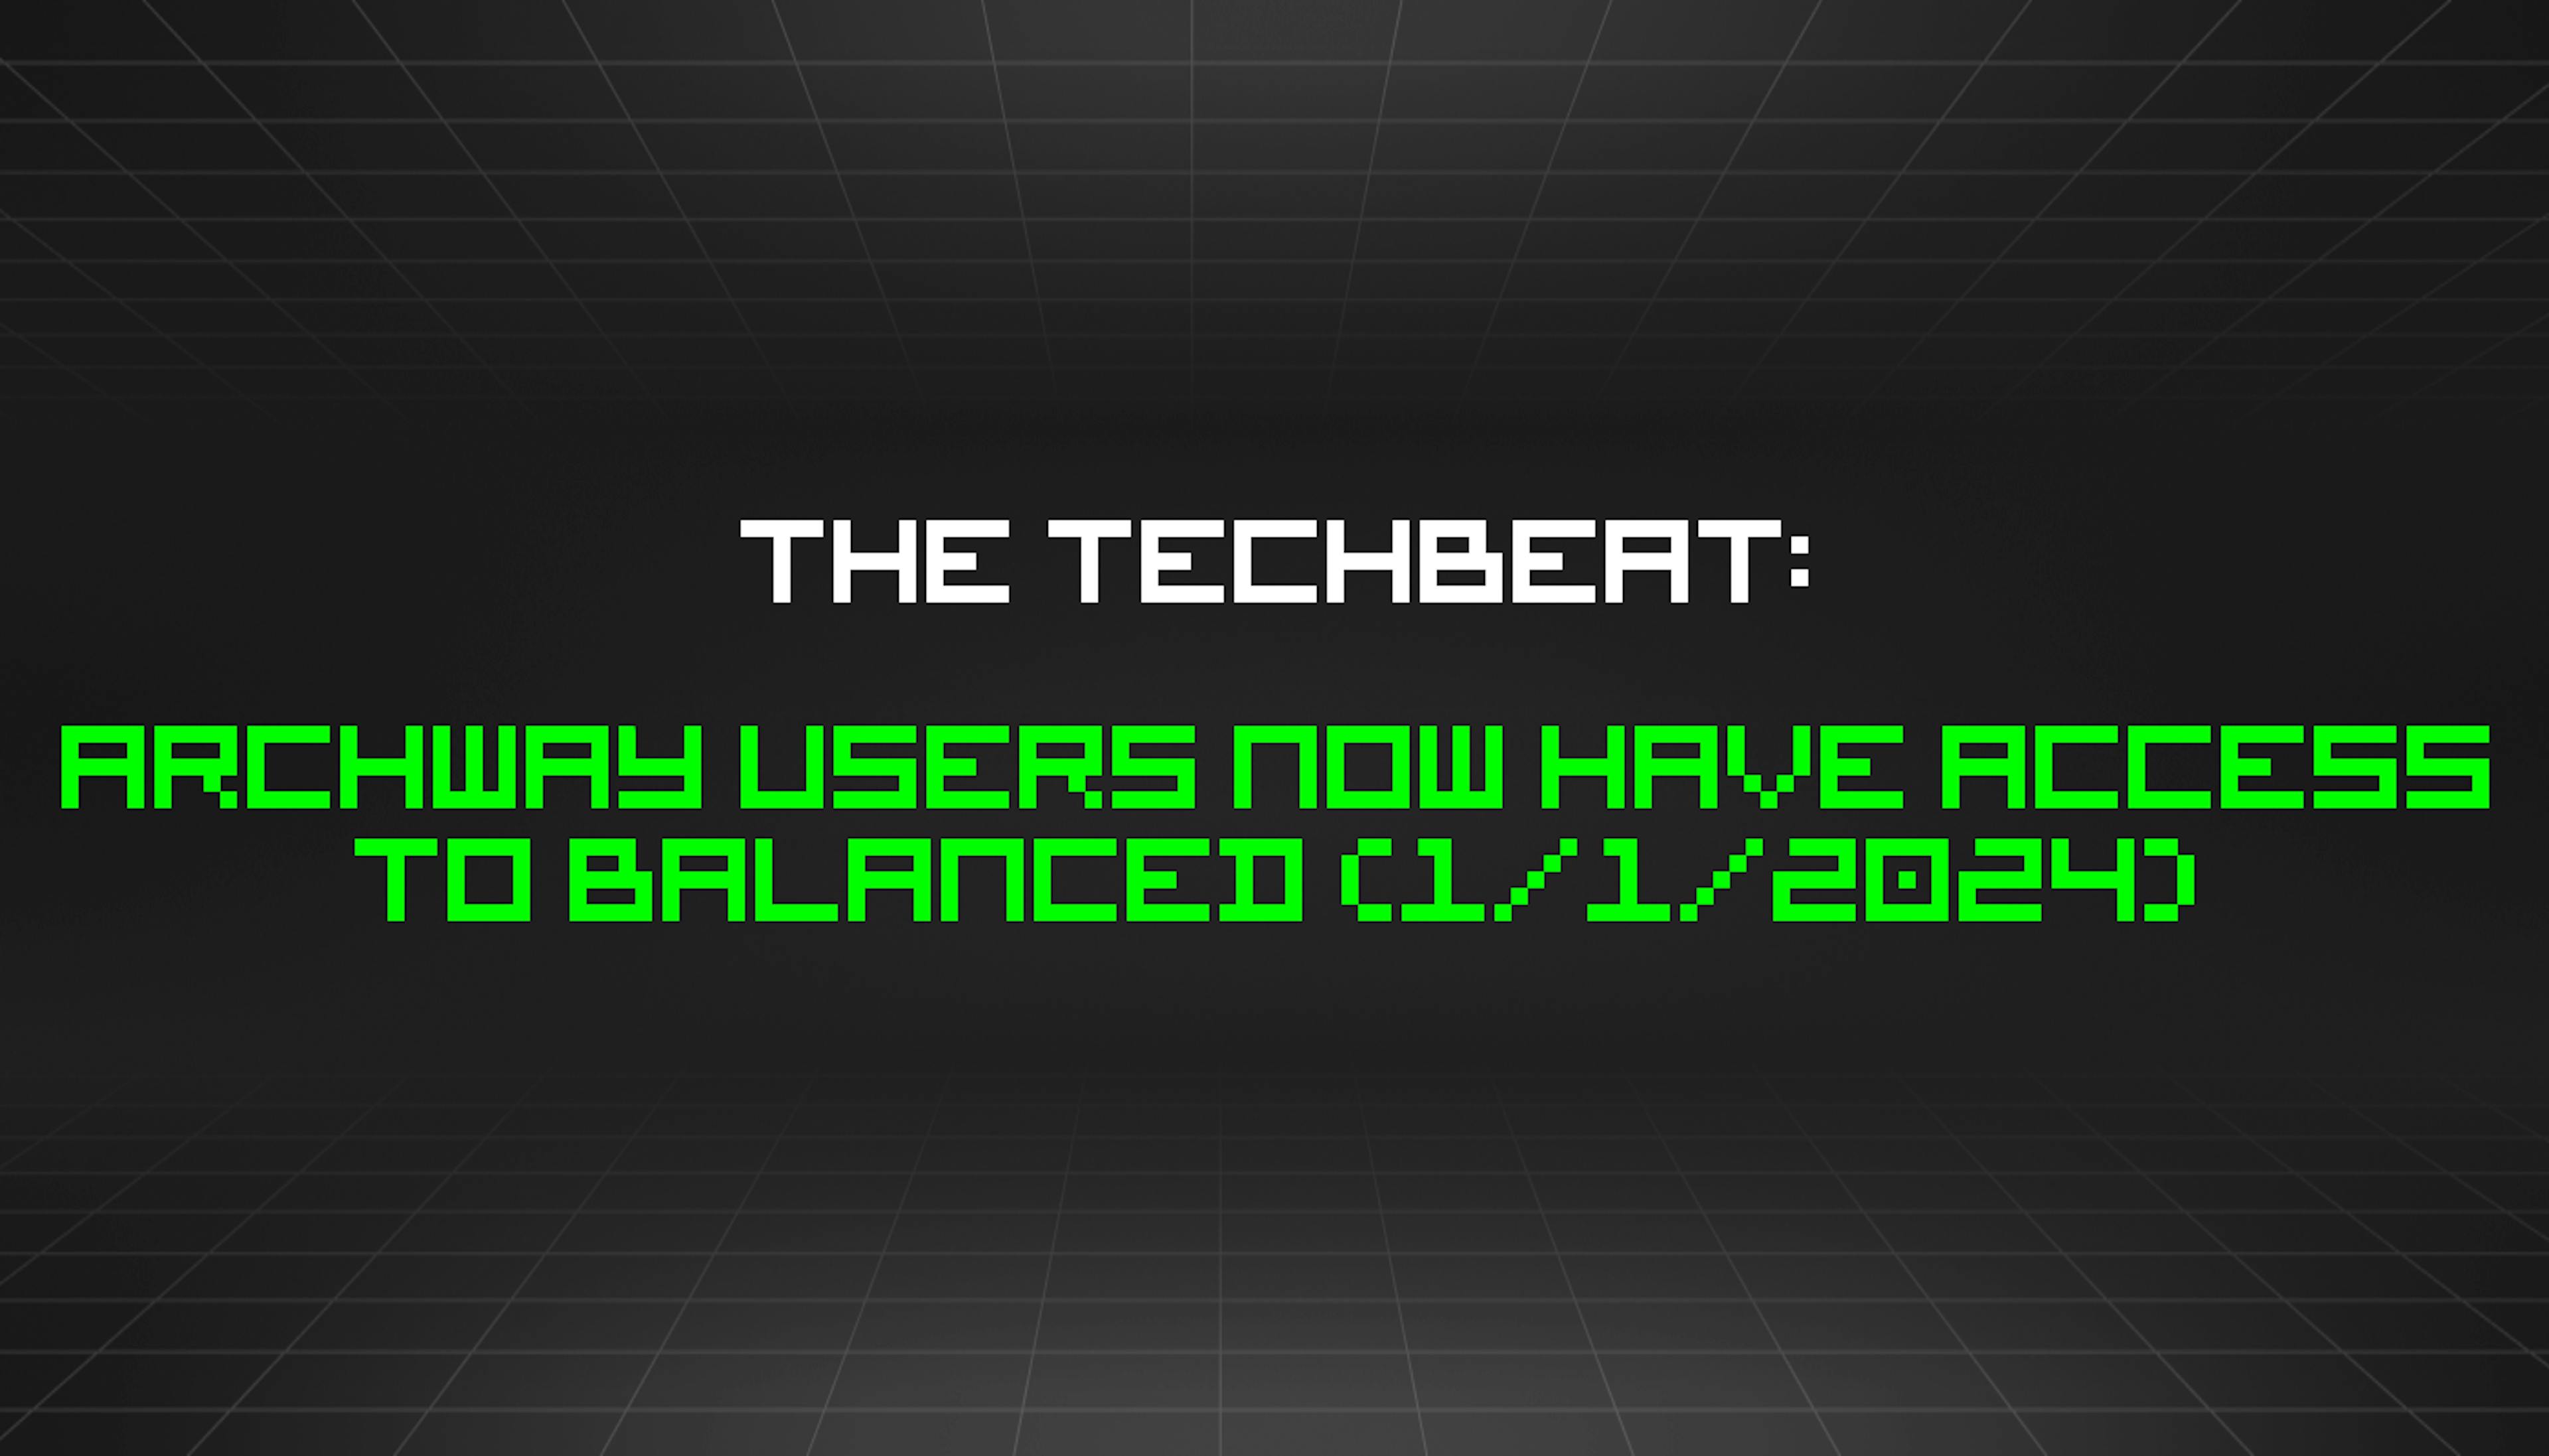 featured image - The TechBeat: Archway Users Now Have Access to Balanced (1/1/2024)